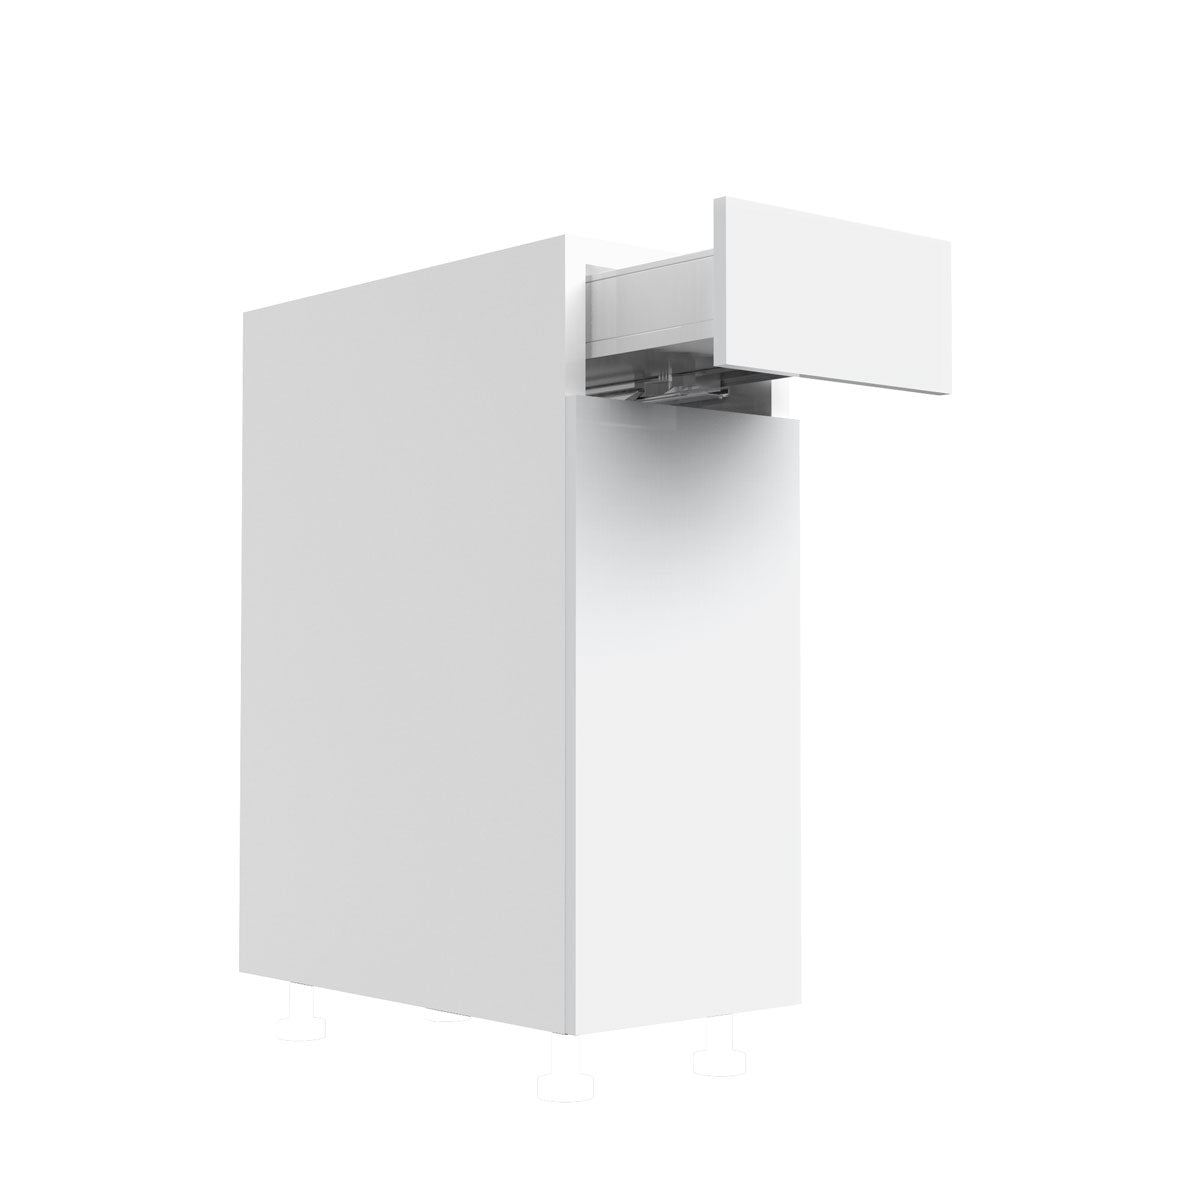 RTA - Glossy White - Single Door Base Cabinets | 12"W x 30"H x 23.8"D